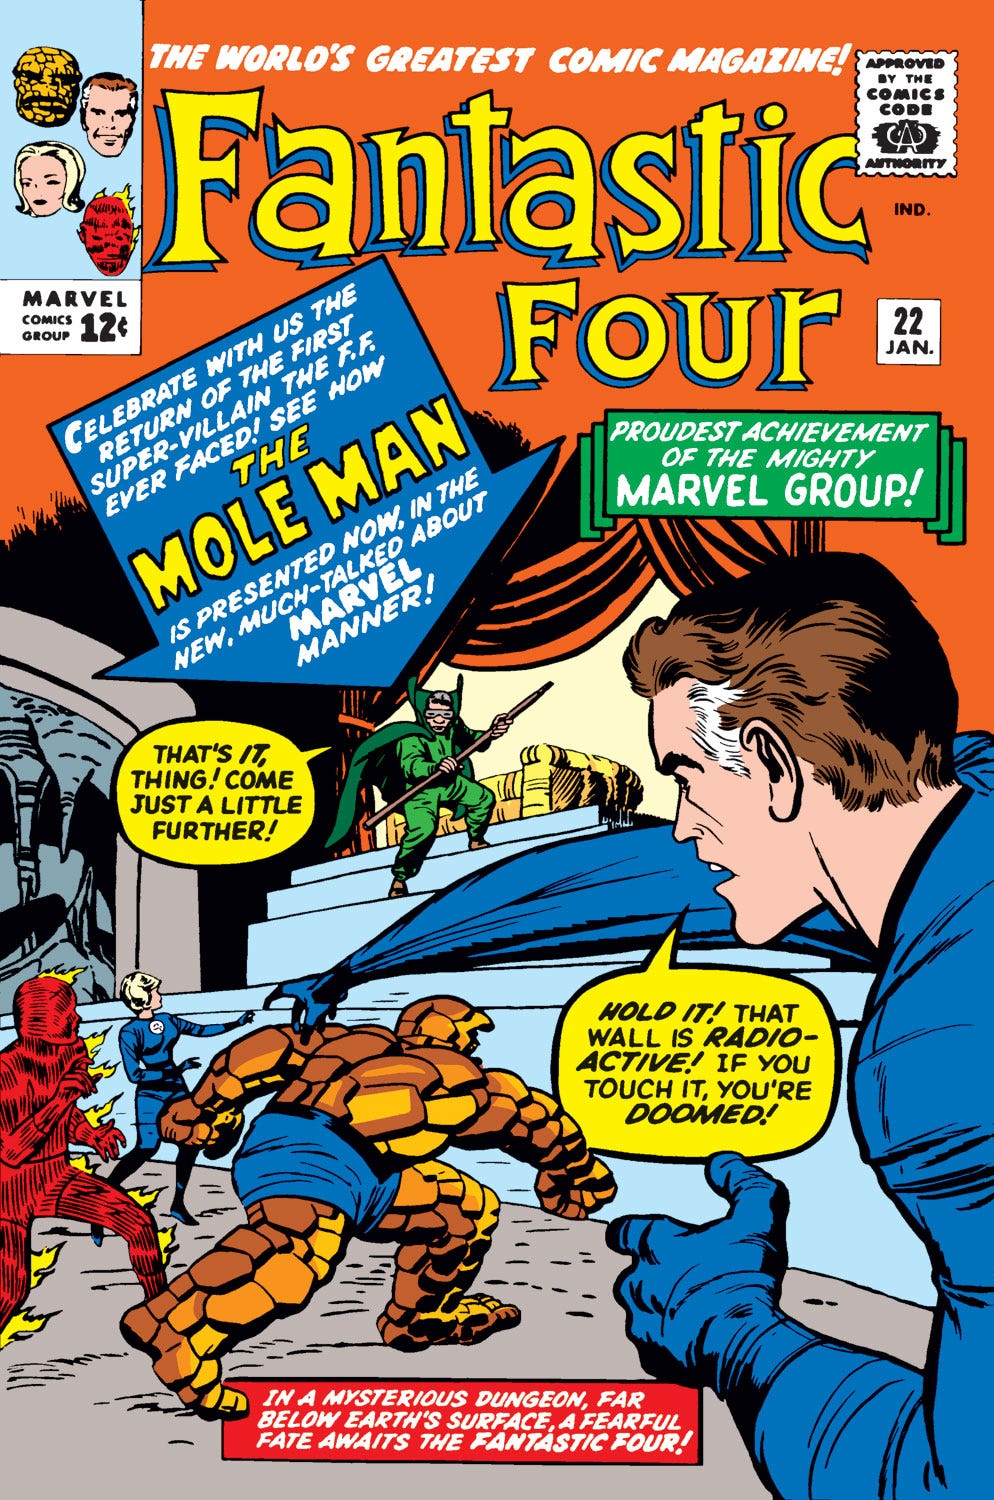 Episode 101: World War III and Invisible Evolution (Fantastic Four #22) - January 1964